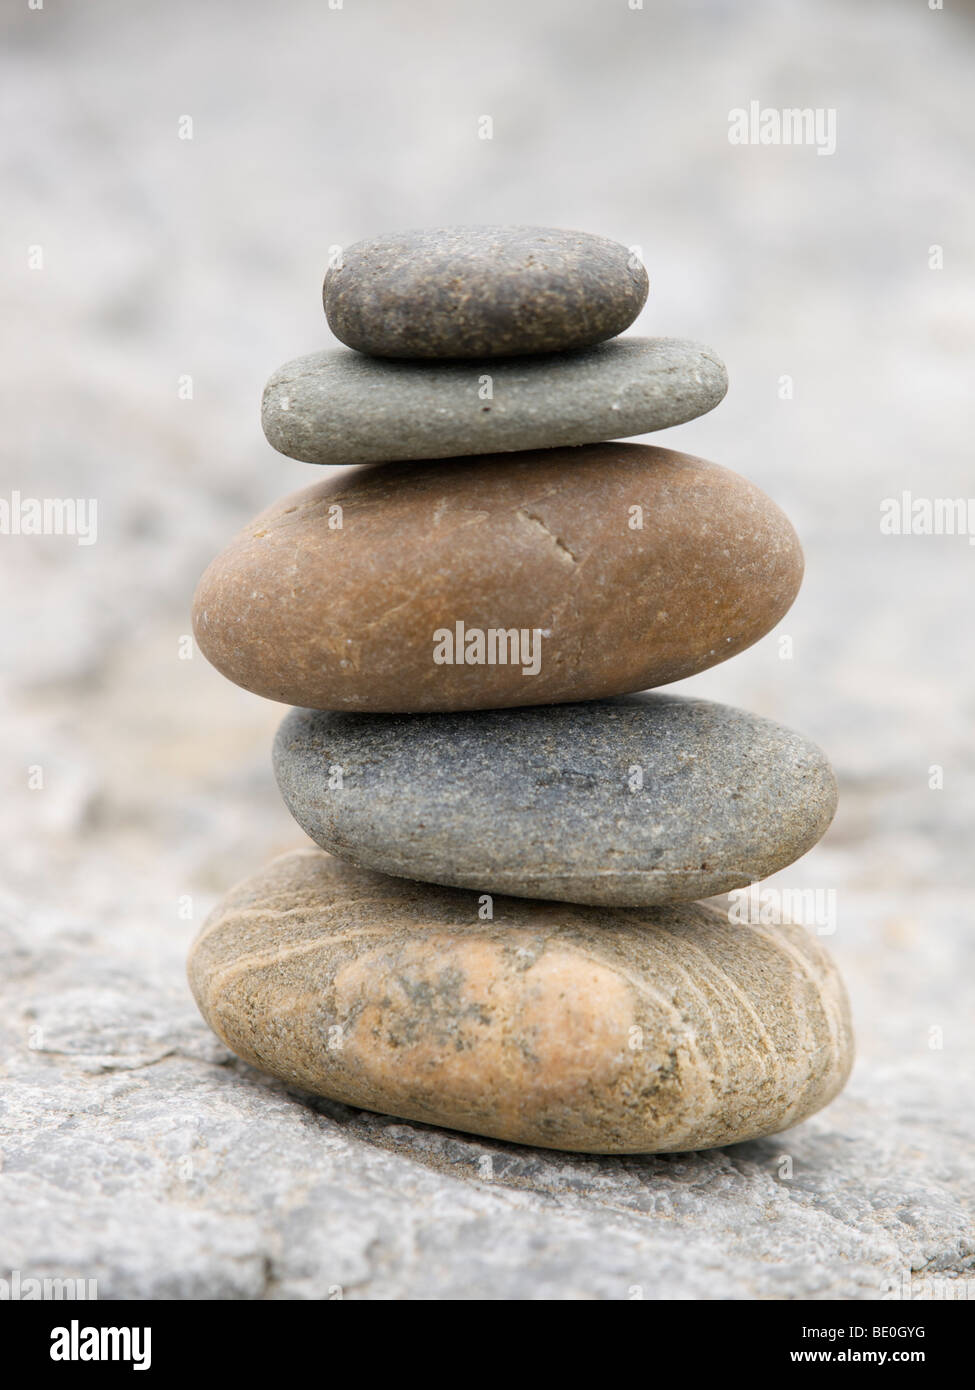 Tower of round stones pebbles stacked in balance Stock Photo